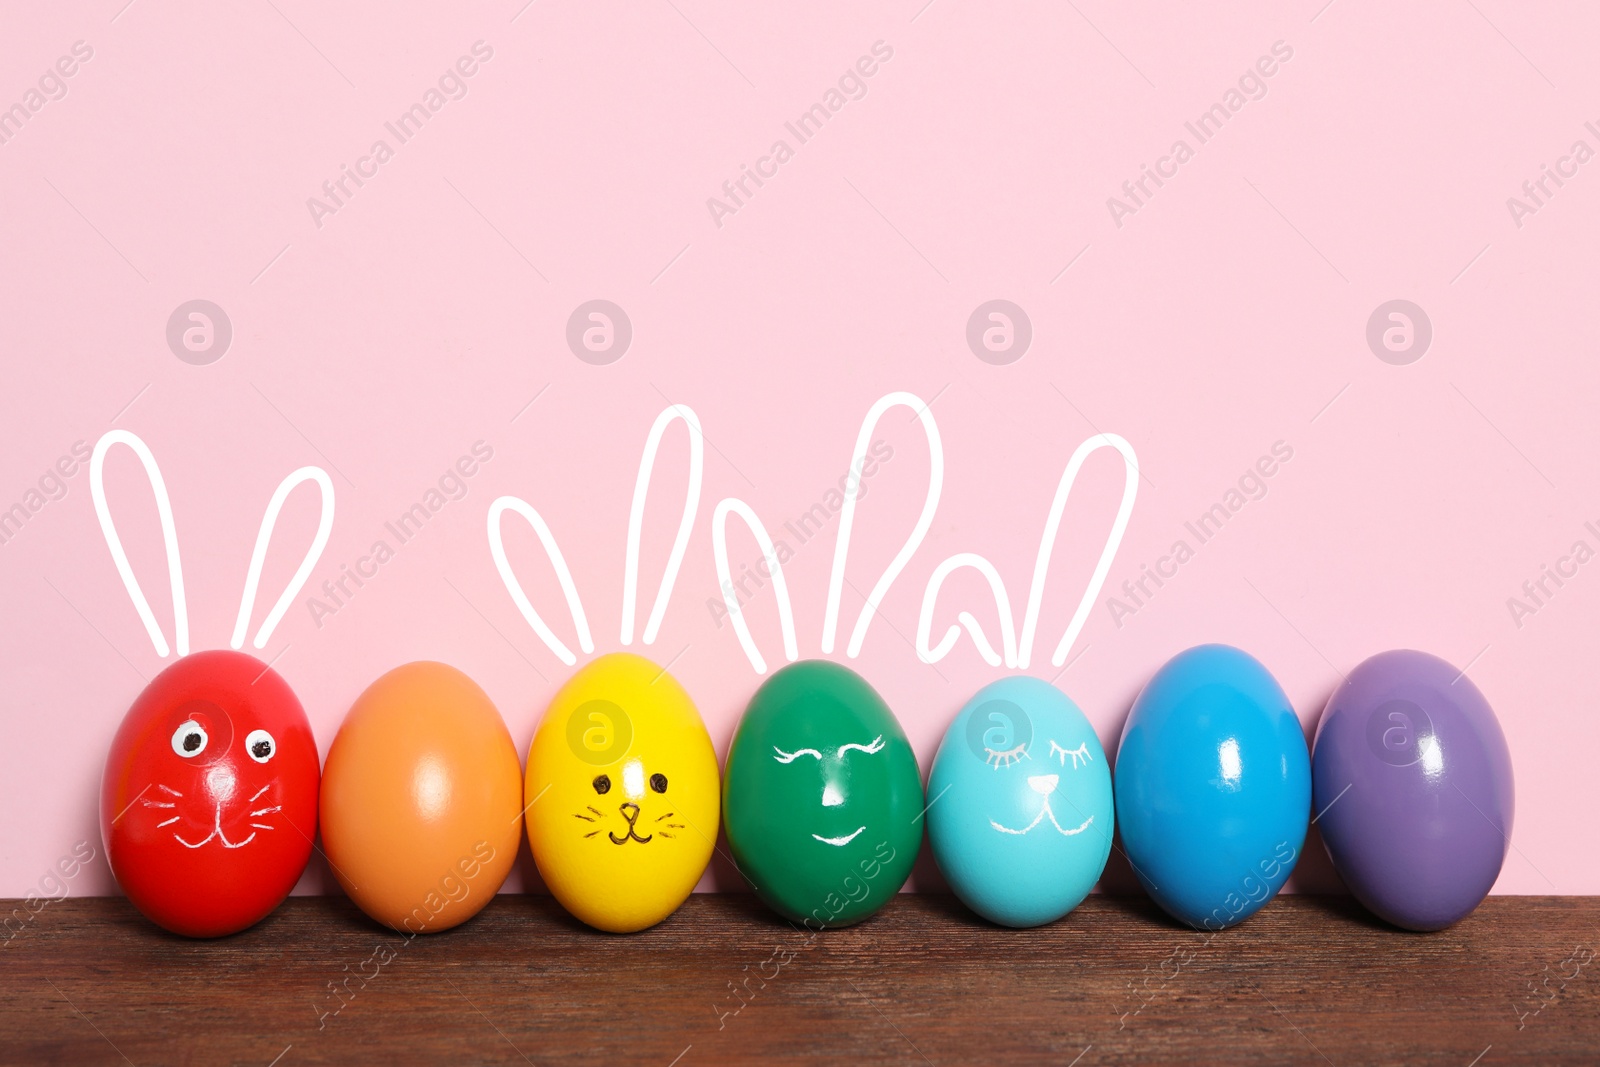 Image of Several eggs with drawn faces and ears as Easter bunnies among others on wooden table against pink background